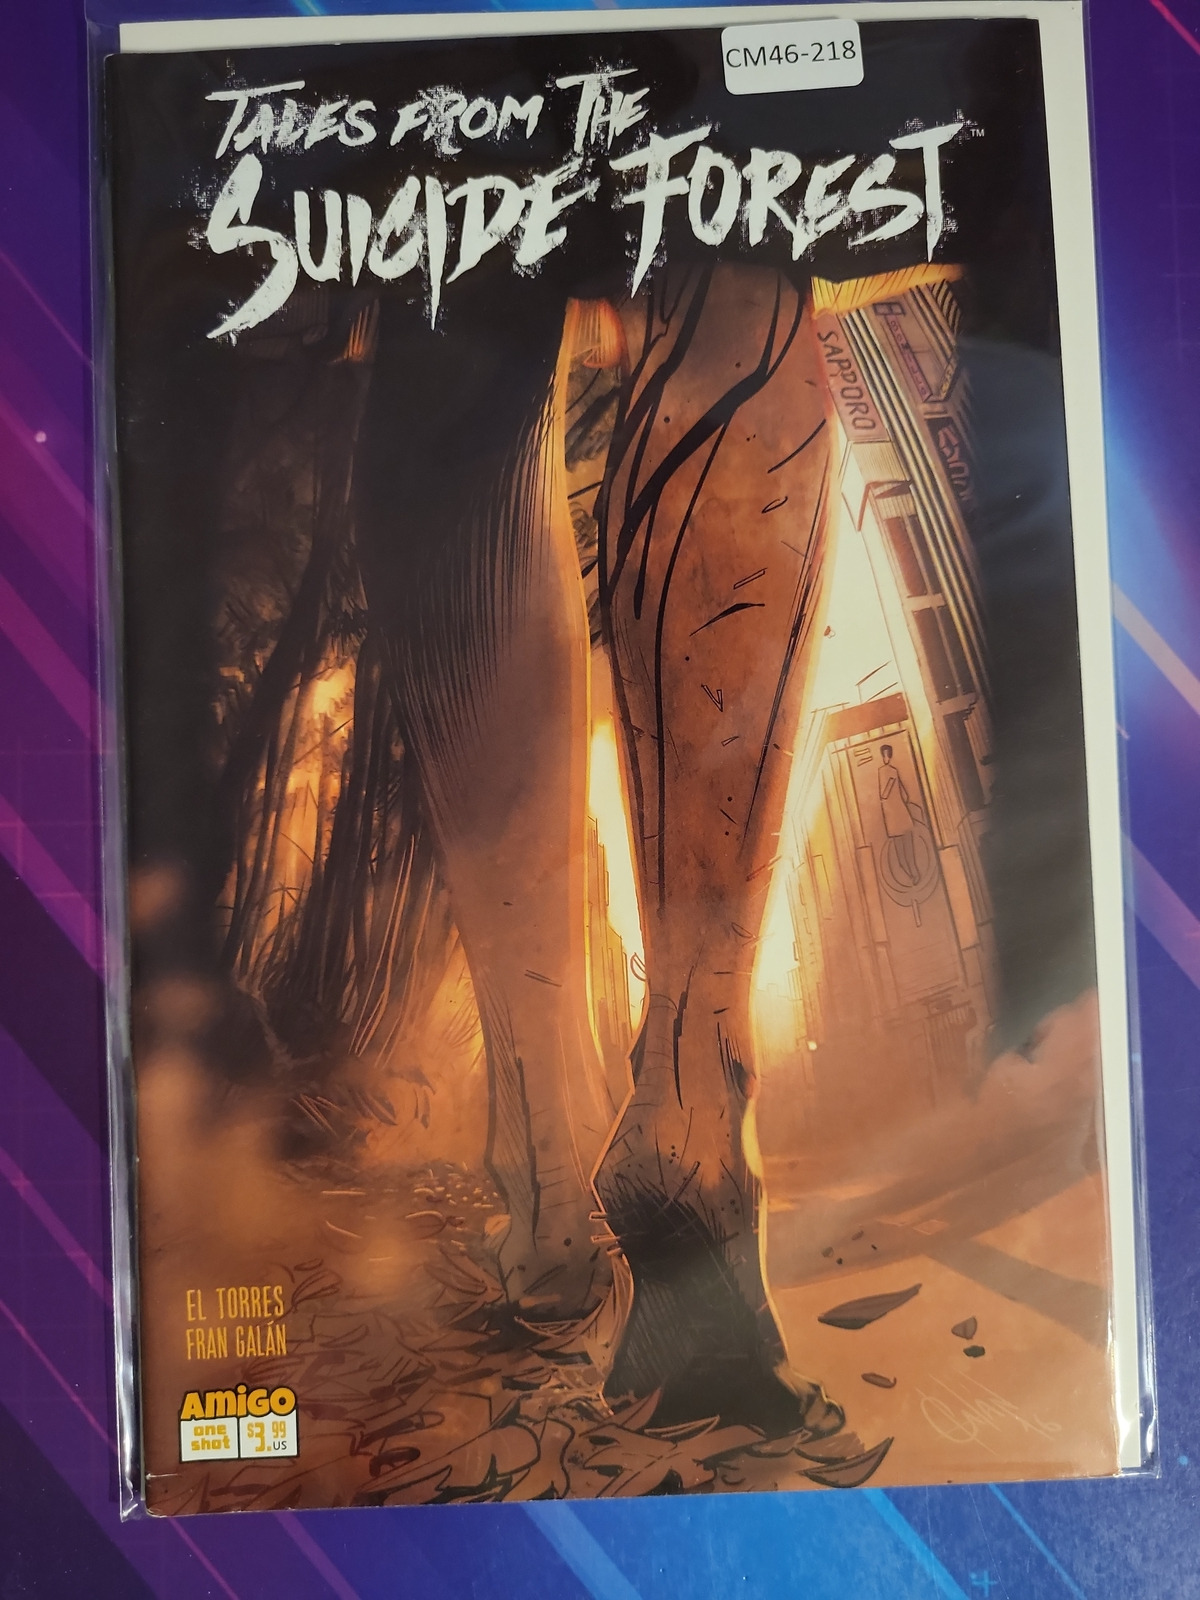 TALES FROM THE SUICIDE FOREST #1 ONE-SHOT 8.0 AMIGO COMIC BOOK CM46-218